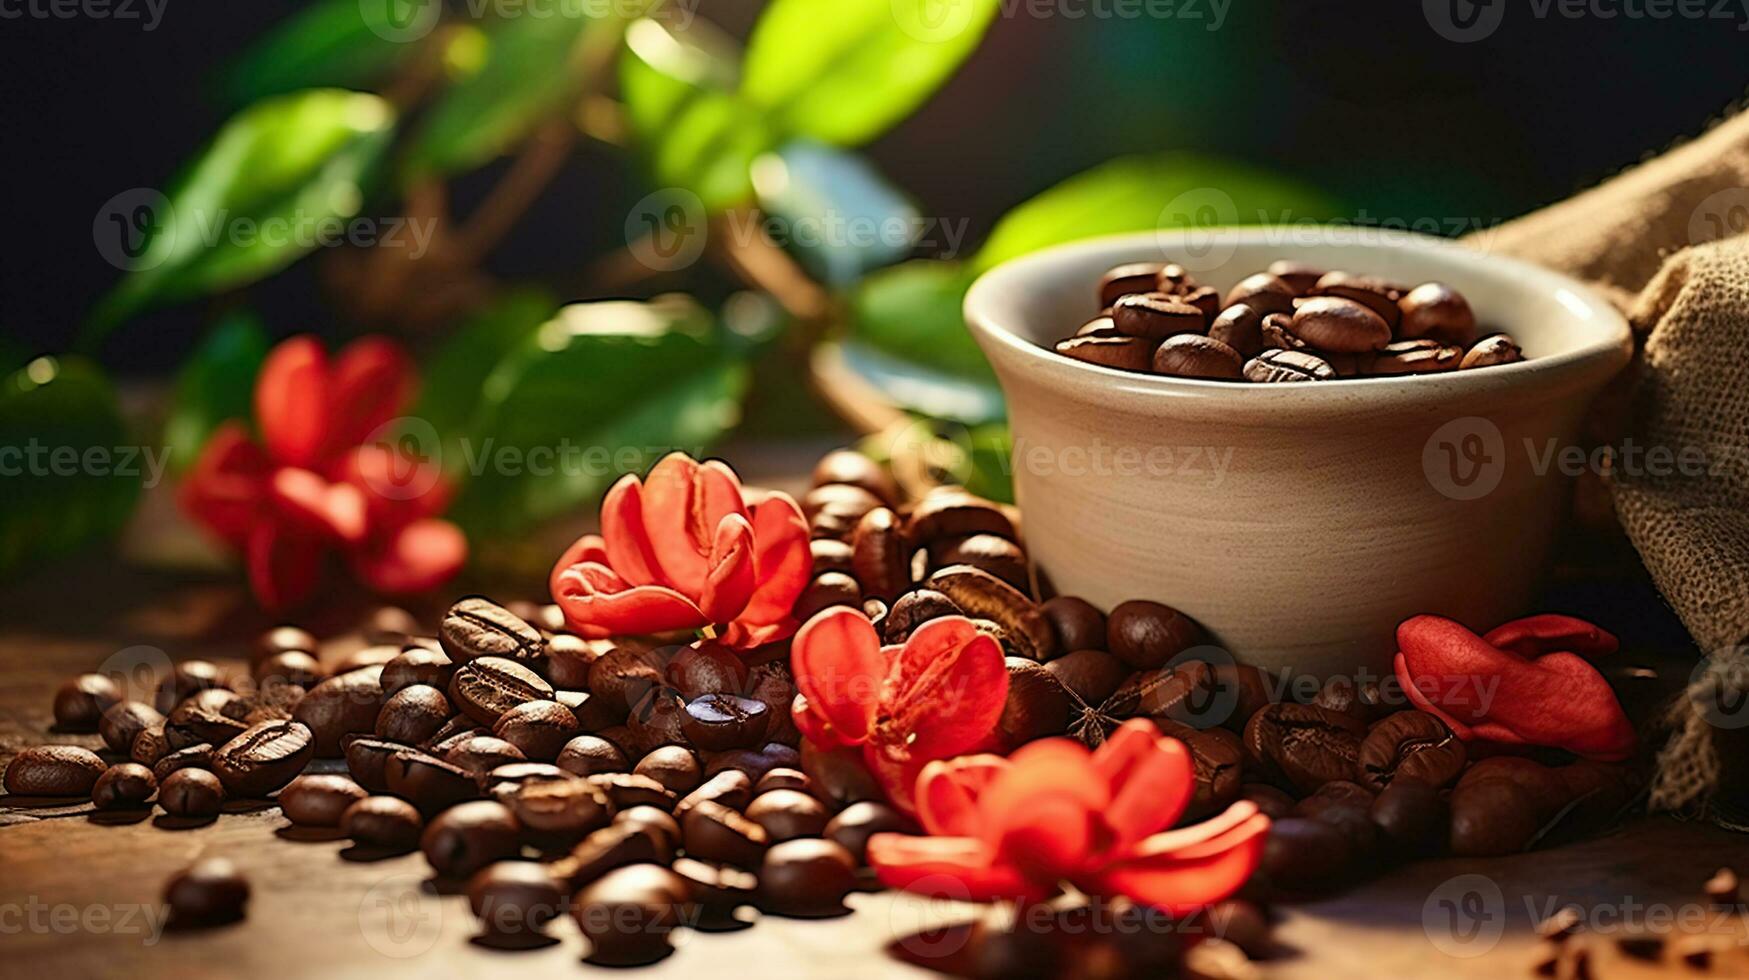 Coffee beans with real coffee fruits, flowers and leaves on wooden table photo